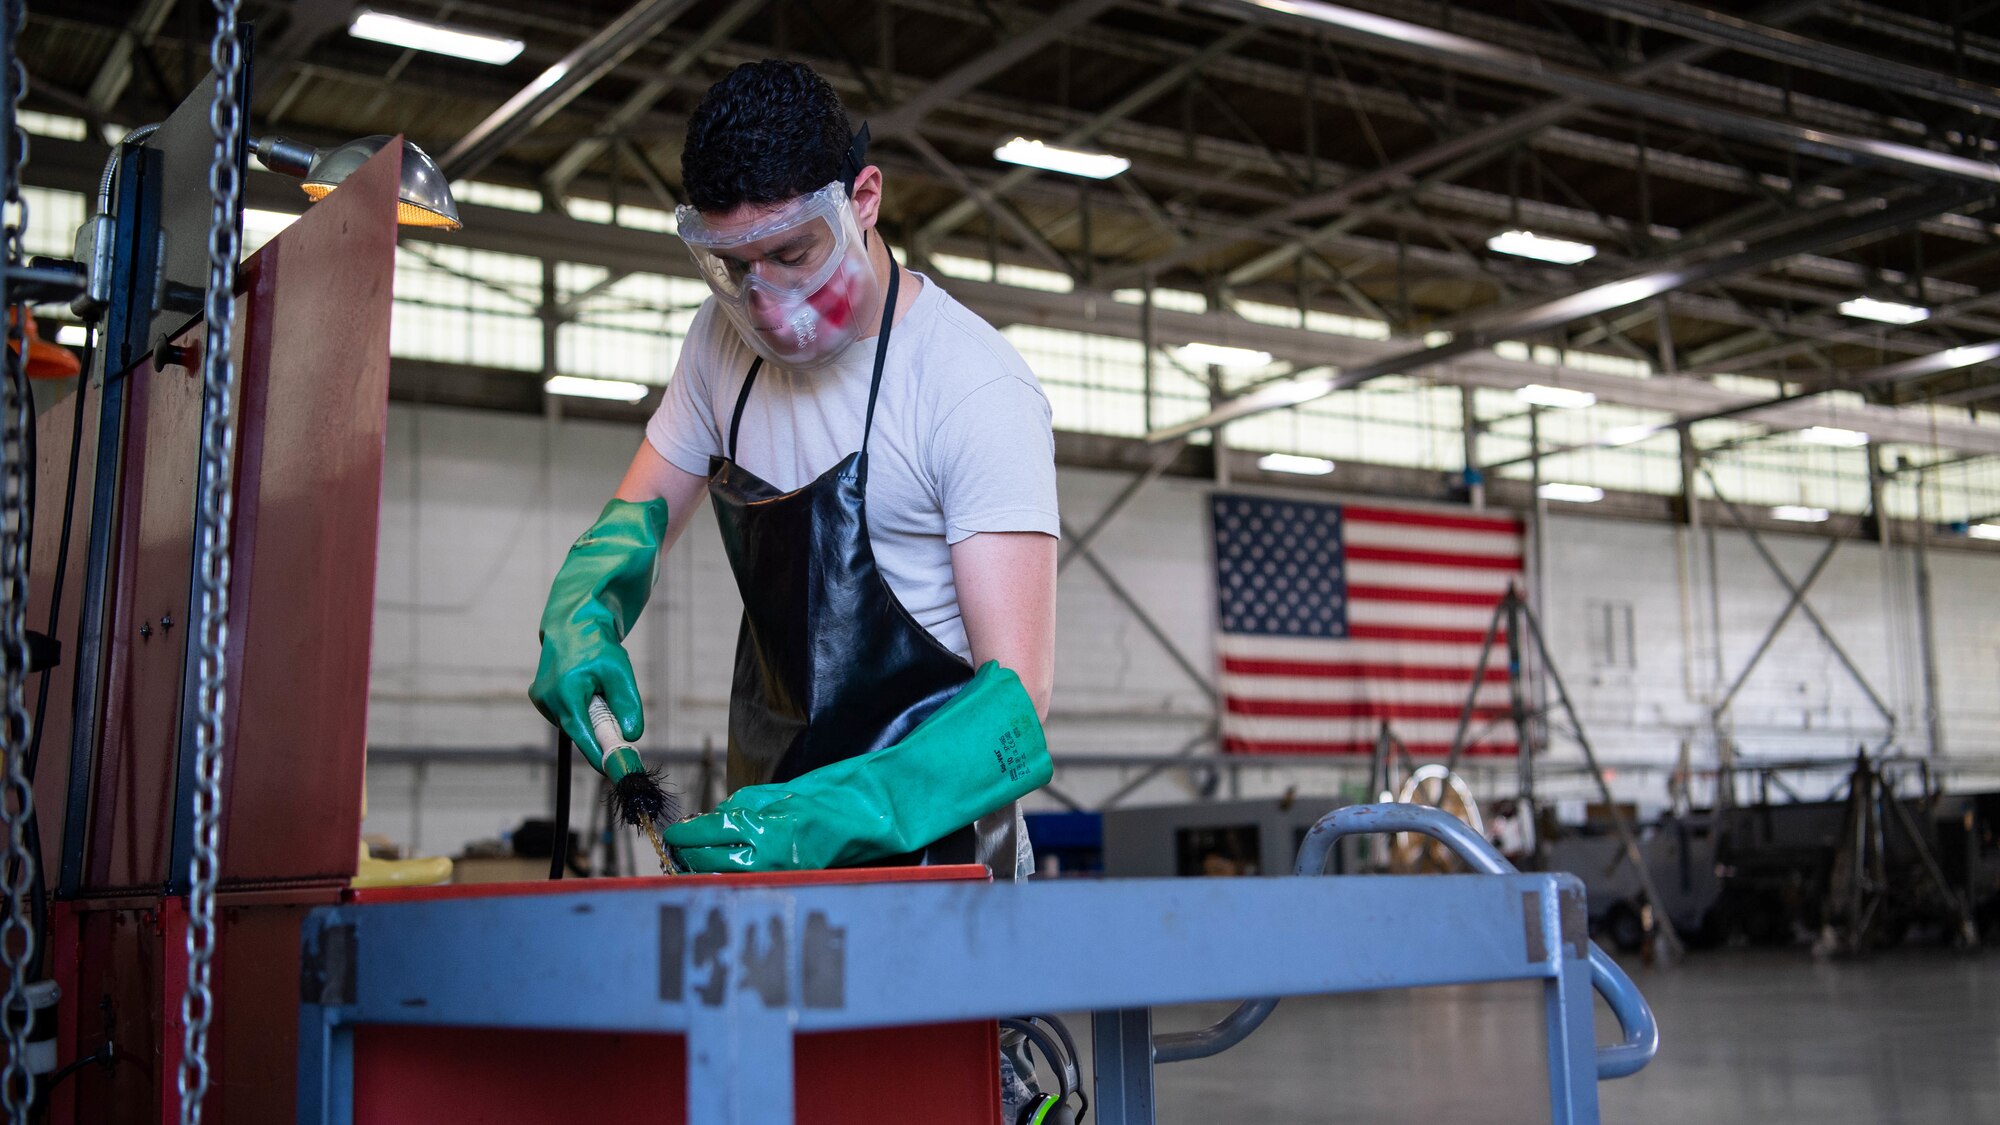 Airman 1st Class Isaiah E. Nieves, 2nd Maintenance Squadron aerospace ground equipment journeyman, cleans mechanical parts at Barksdale Air Force Base, La., June 10, 2020. Nieves joined the Air Force in July 2019, and arrived at Barksdale in March 2020. (U.S. Air Force photo by Airman 1st Class Jacob B. Wrightsman)